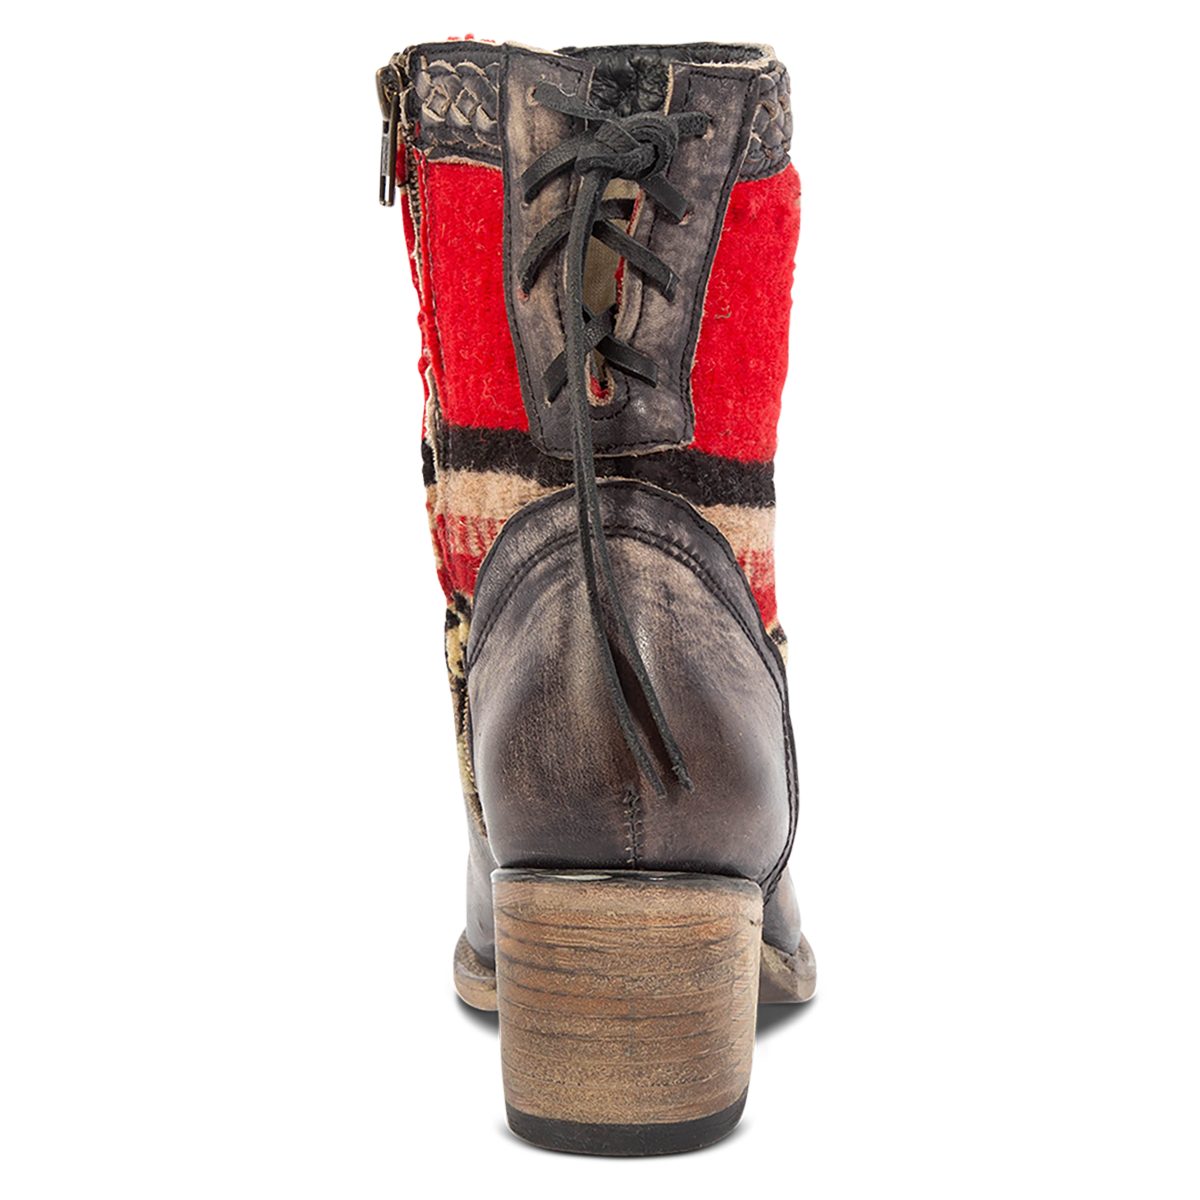 Back view showing adjustable leather lacing, a stacked heel and multi-colored woven detailing on FREEBIRD women's Songbird black leather bootie